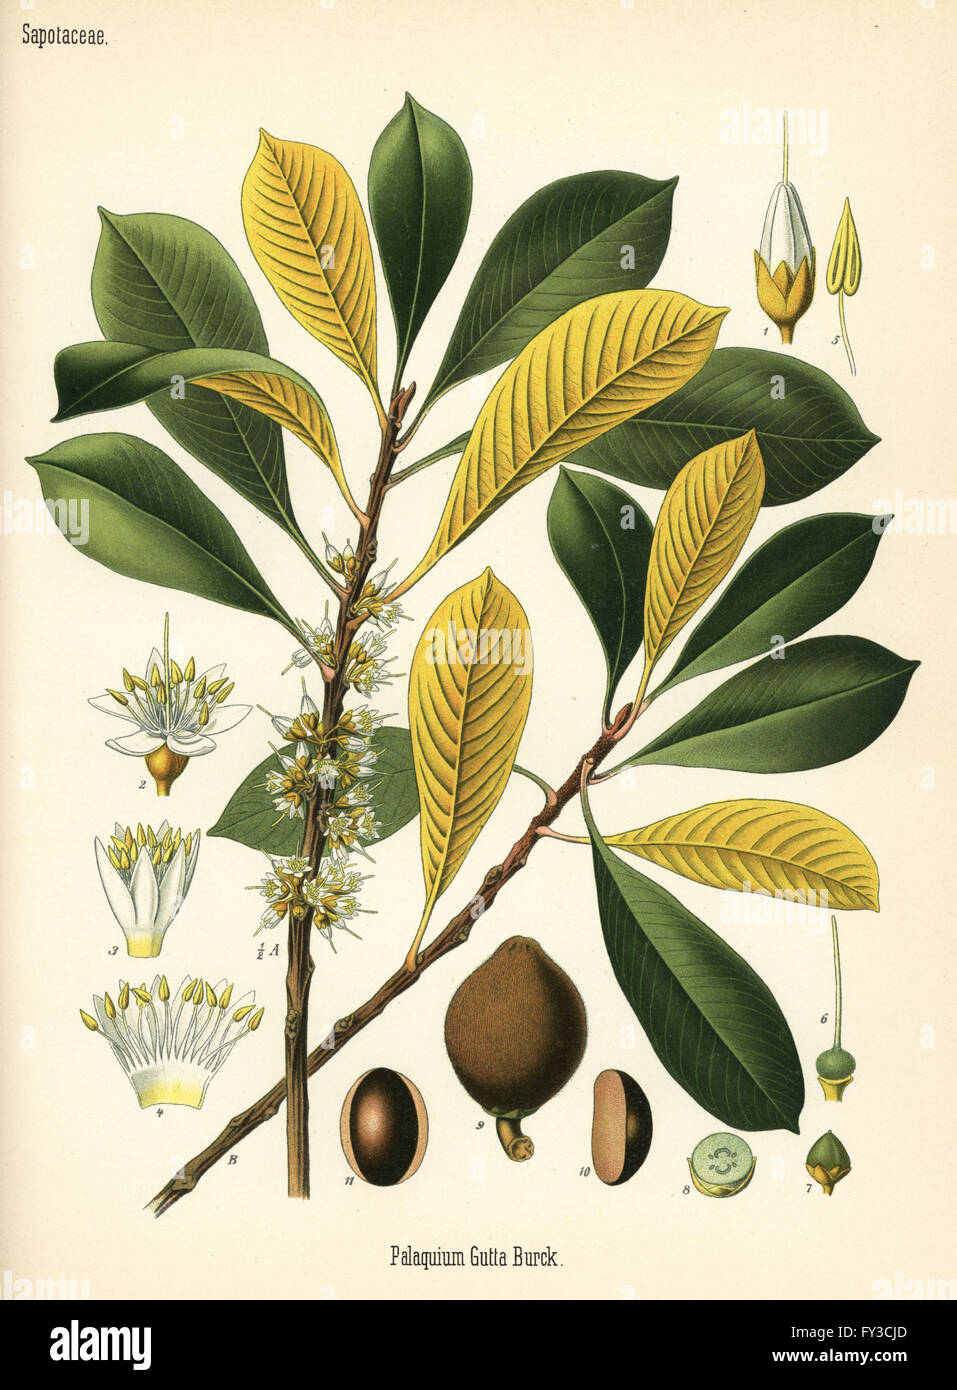 Gutta percha, Palaquium gutta. Chromolithograph after a botanical illustration from Hermann Adolph Koehler's Medicinal Plants, edited by Gustav Pabst, Koehler, Germany, 1887. Stock Photo